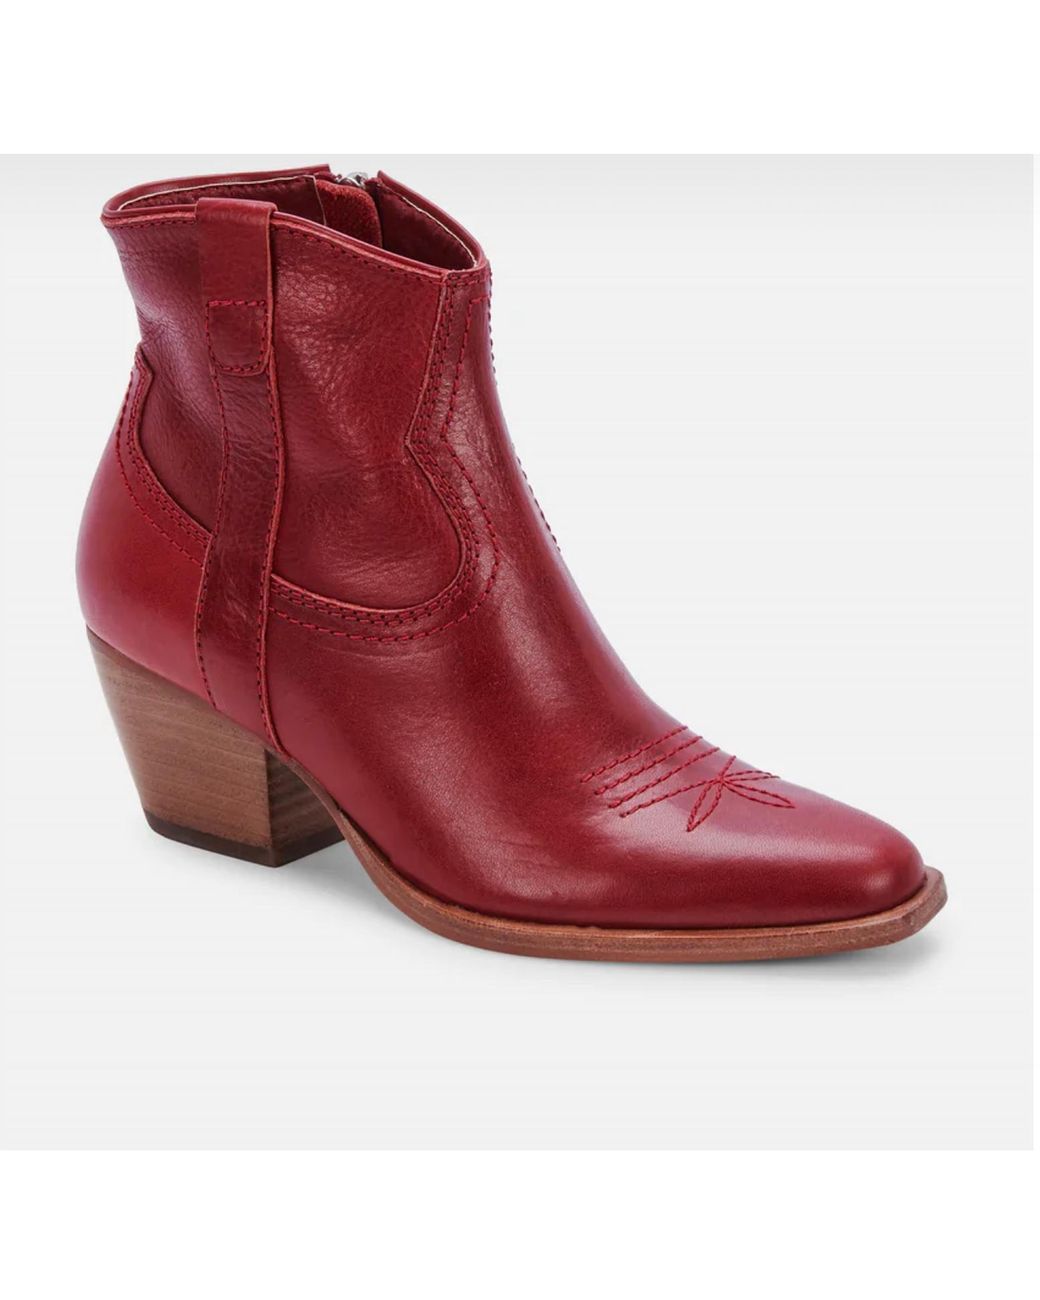 Dolce Vita Silma Bootie in Red | Lyst